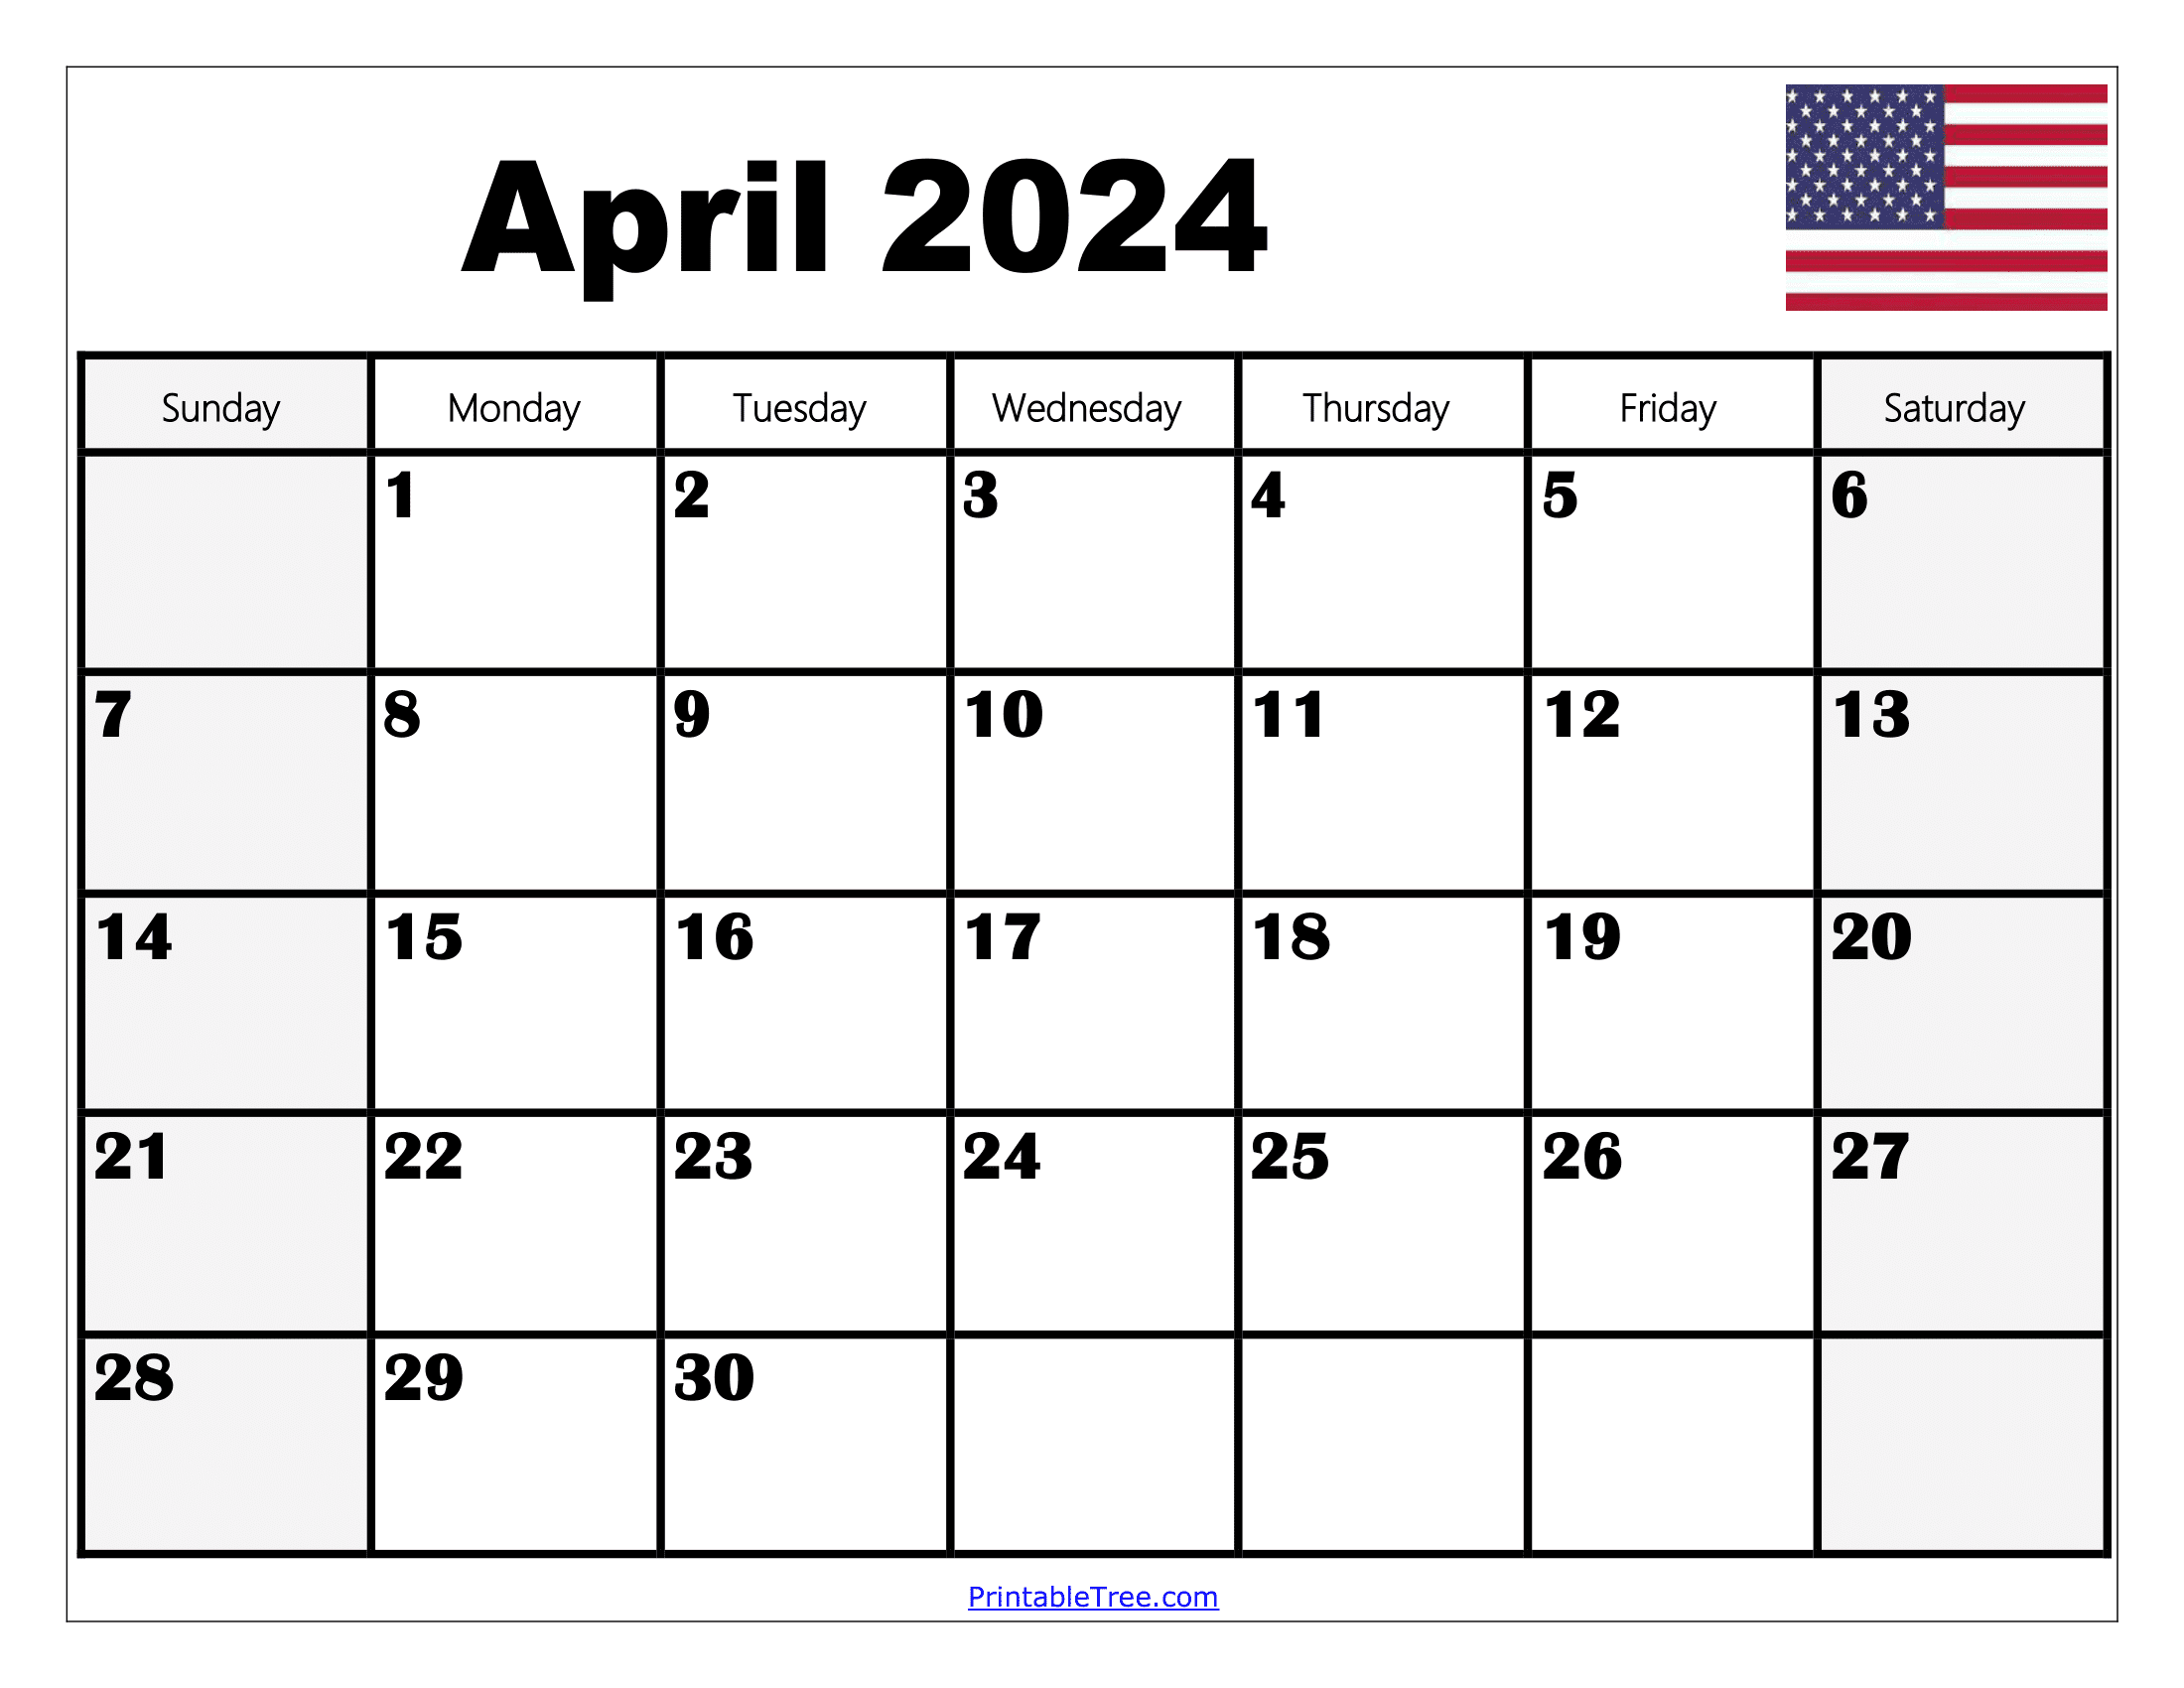 Blank April 2024 Calendar Printable Pdf Template With Holidays intended for Free Printable April 2024 Calendar Template